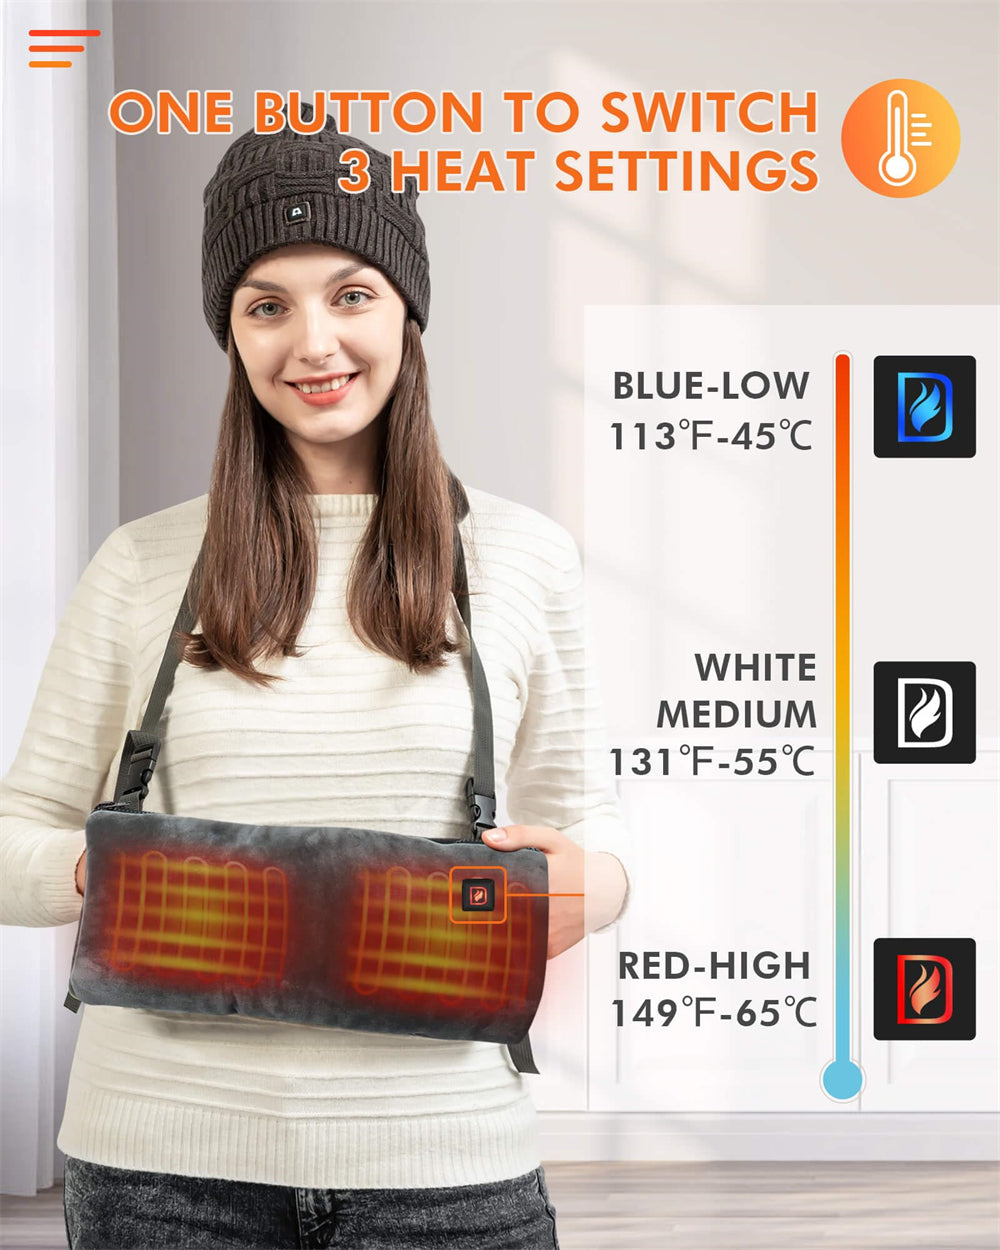 One button to switch 3 temperature settings